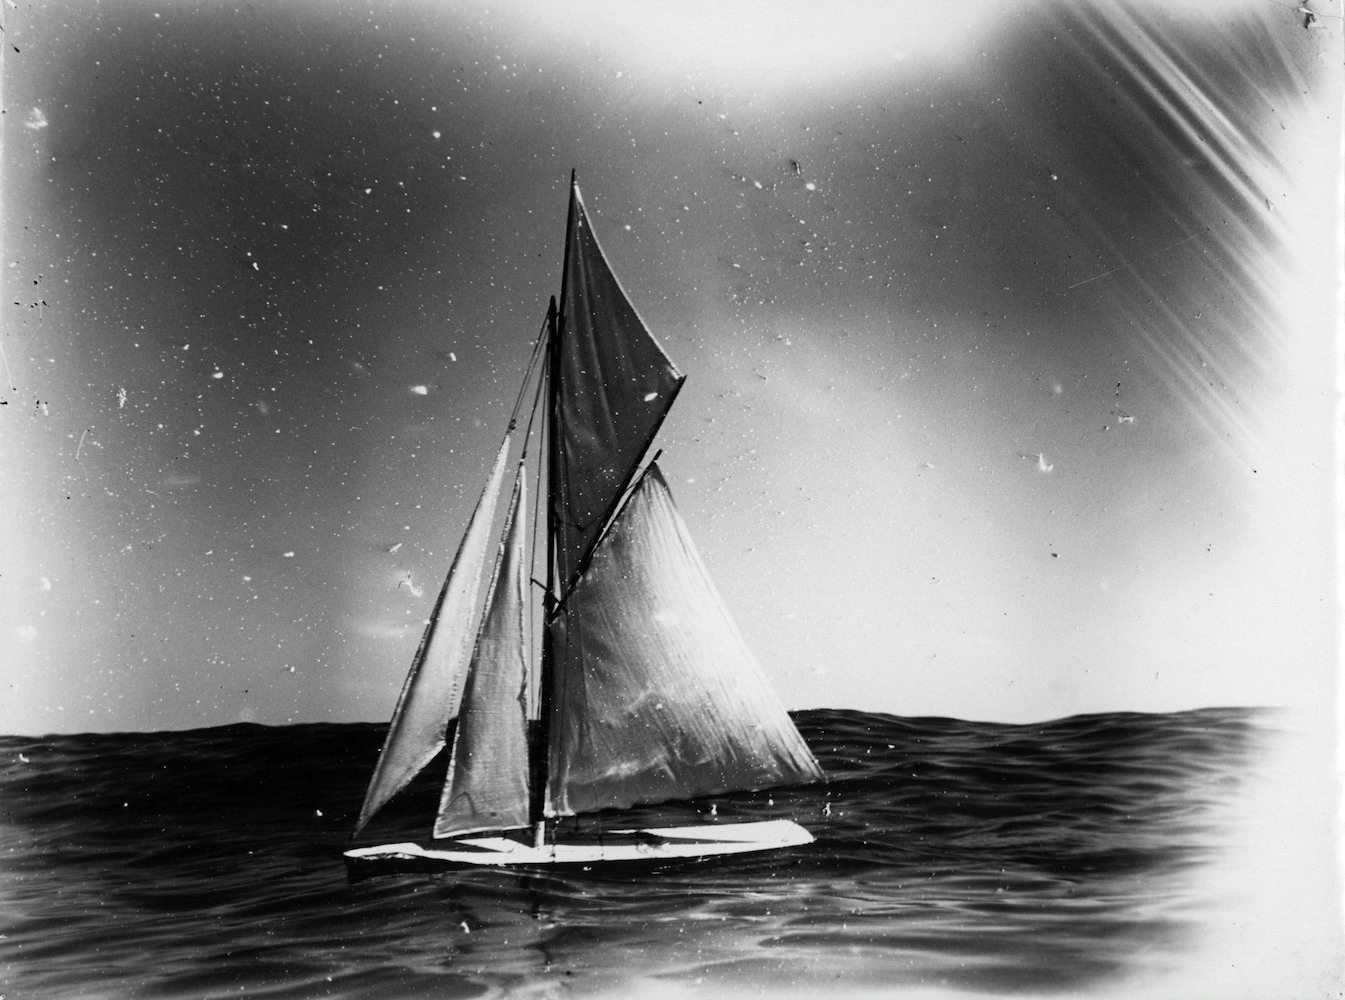 Model yacht, light incidence during plate chang